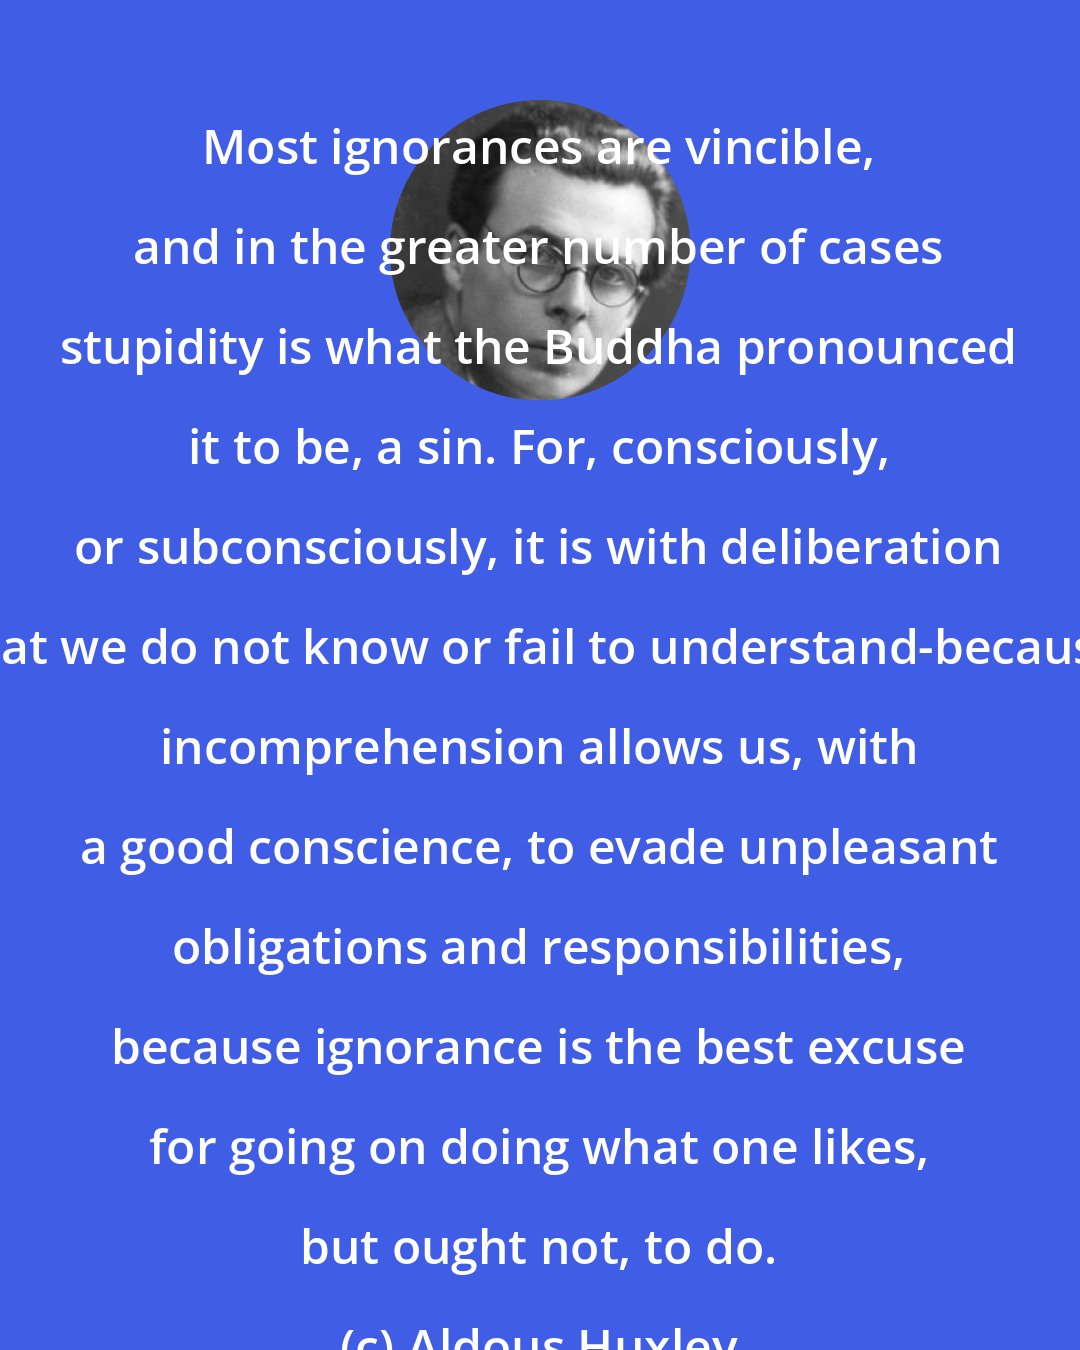 Aldous Huxley: Most ignorances are vincible, and in the greater number of cases stupidity is what the Buddha pronounced it to be, a sin. For, consciously, or subconsciously, it is with deliberation that we do not know or fail to understand-because incomprehension allows us, with a good conscience, to evade unpleasant obligations and responsibilities, because ignorance is the best excuse for going on doing what one likes, but ought not, to do.